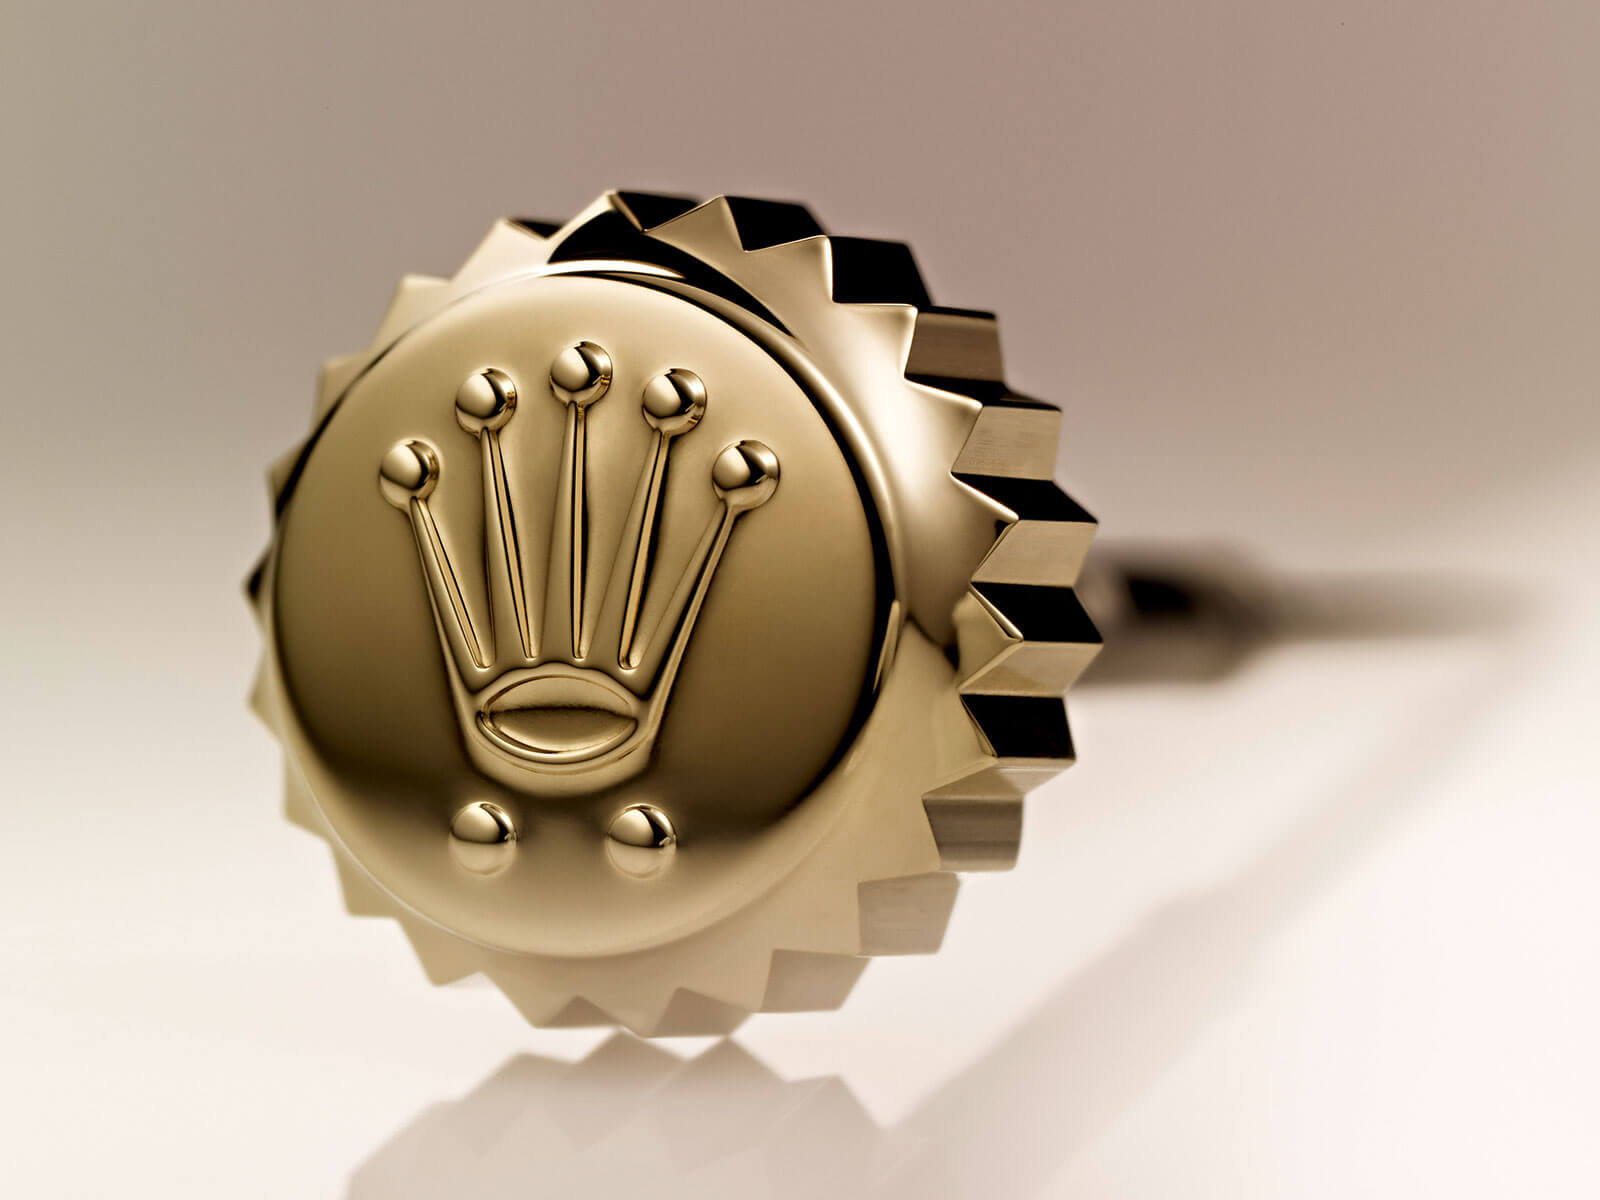 How much do you know about the Rolex Winding Crown?